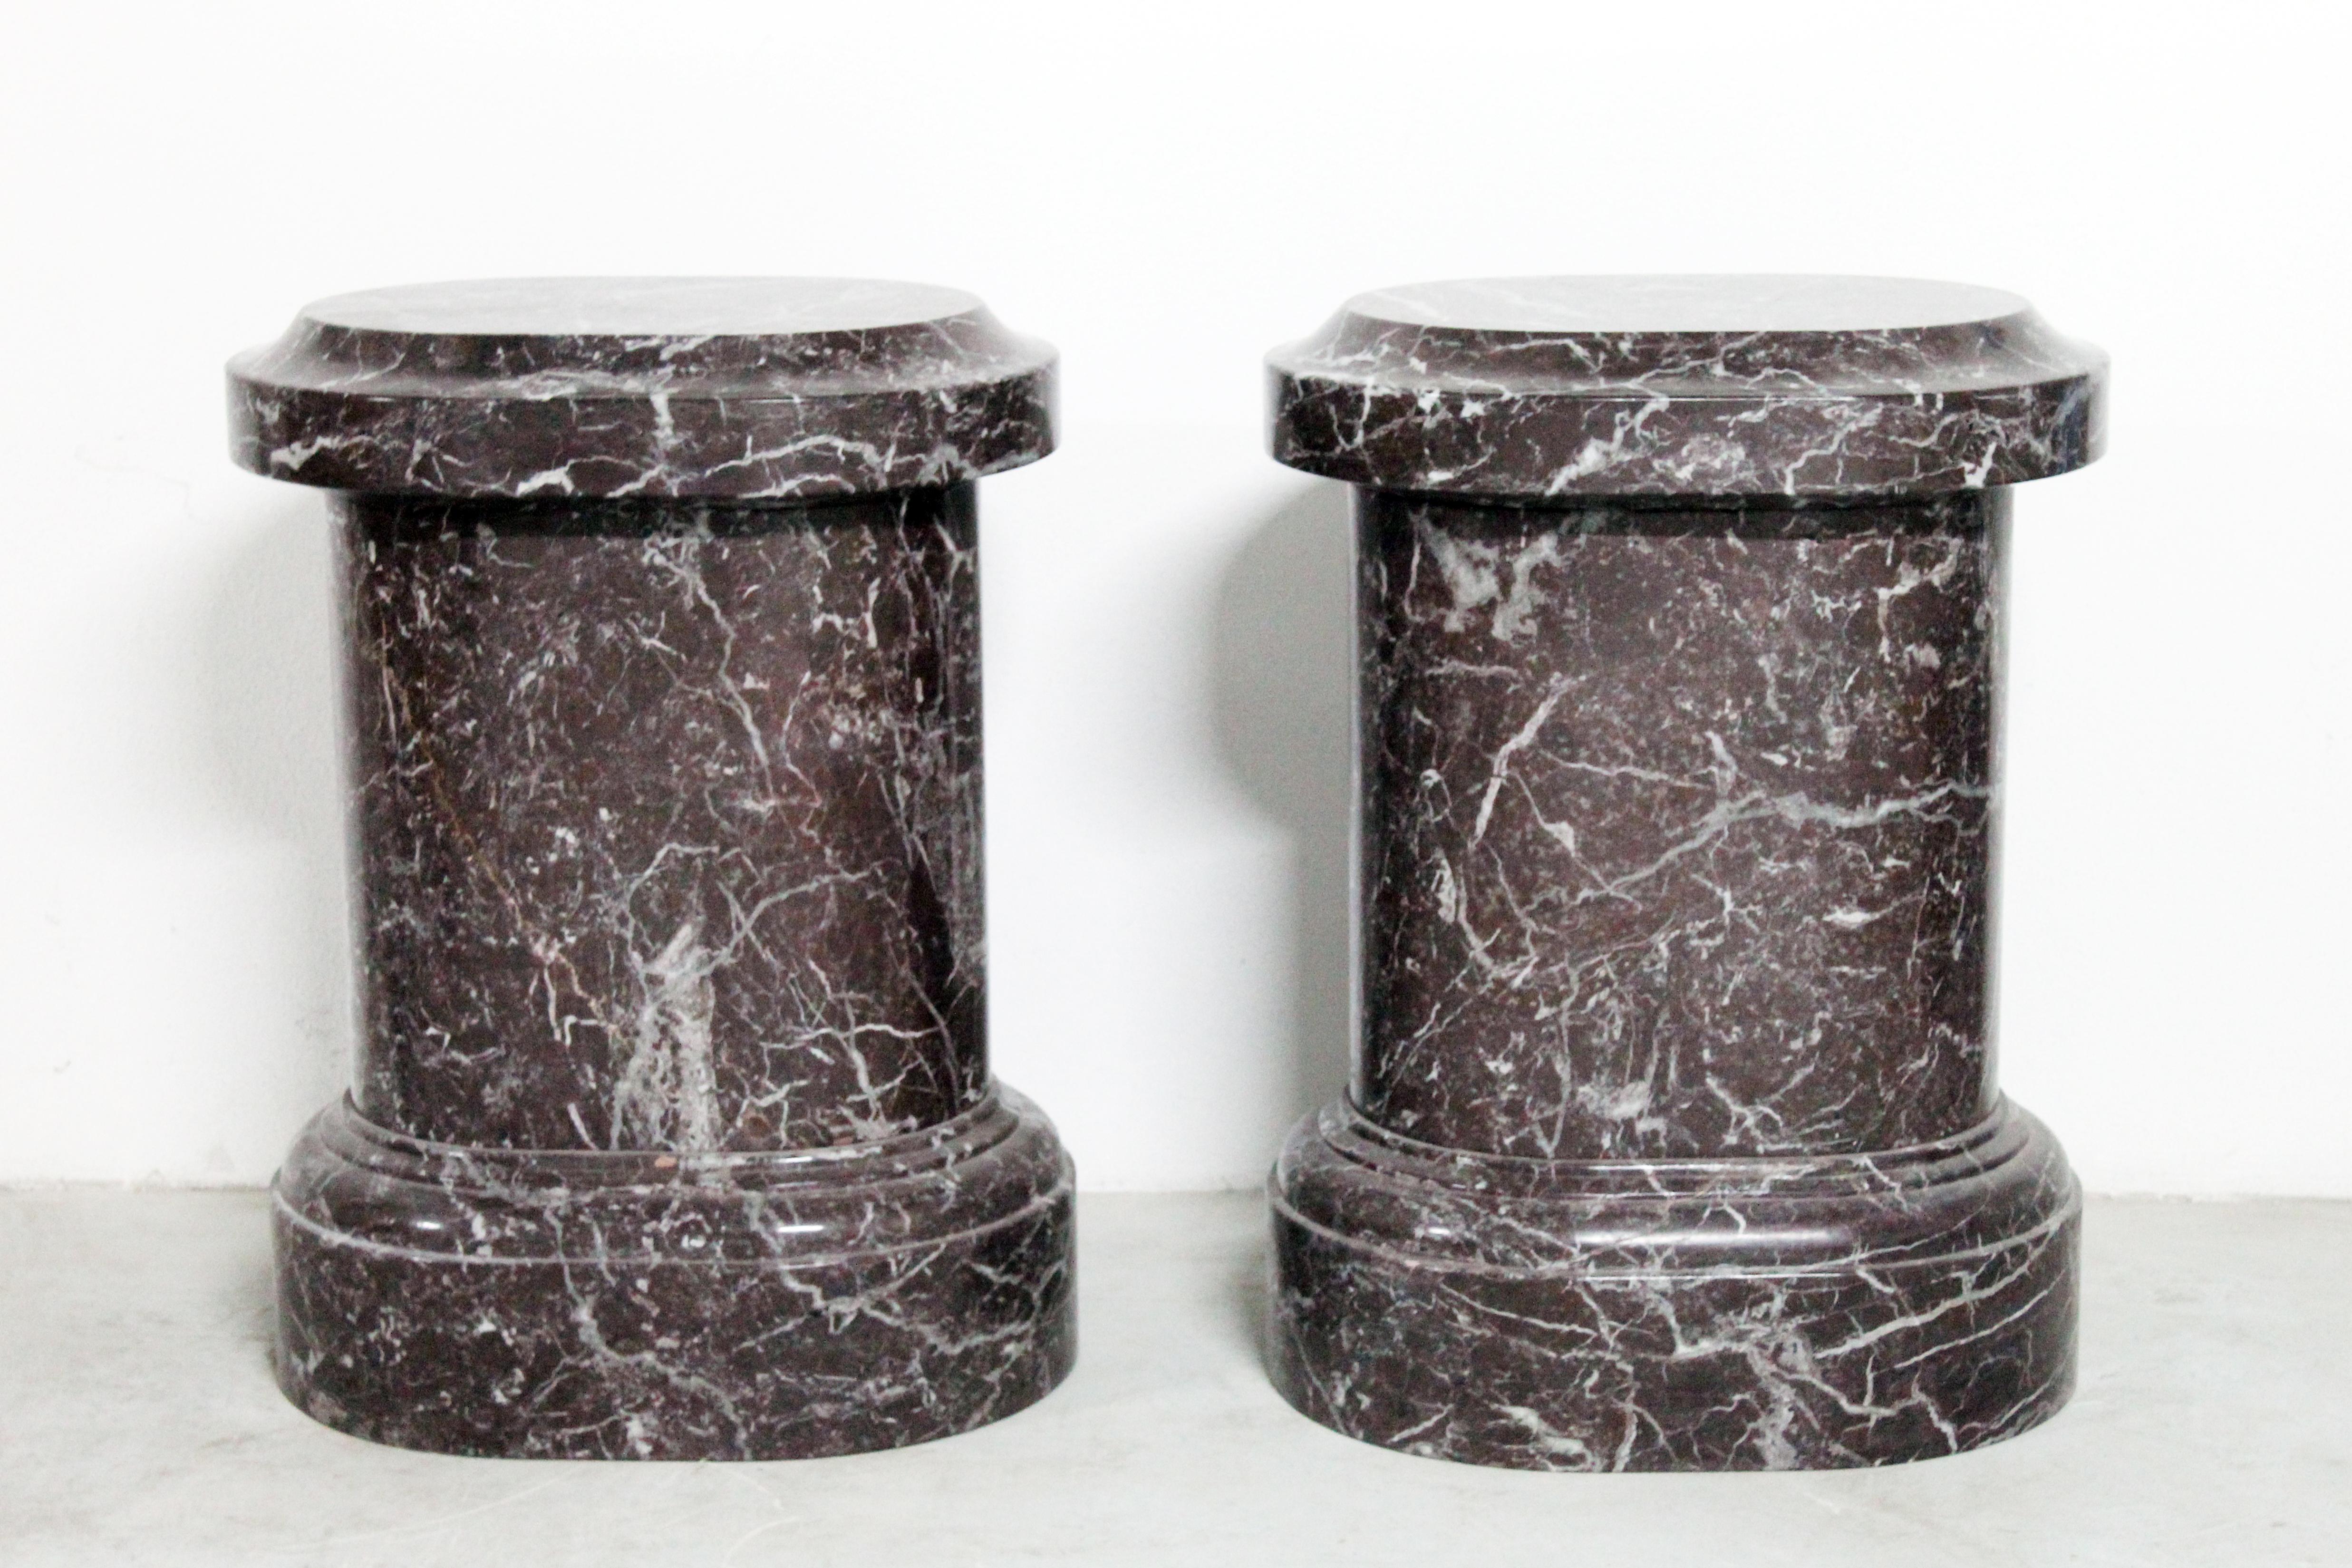 A beautiful pair of pedestals made in red and violet marble called rosso Levanto, quarried in one of the last quarries of this elegant and precious Italian Tuscany marble. Made in solid marble but made empty inside to take out weight but at the same